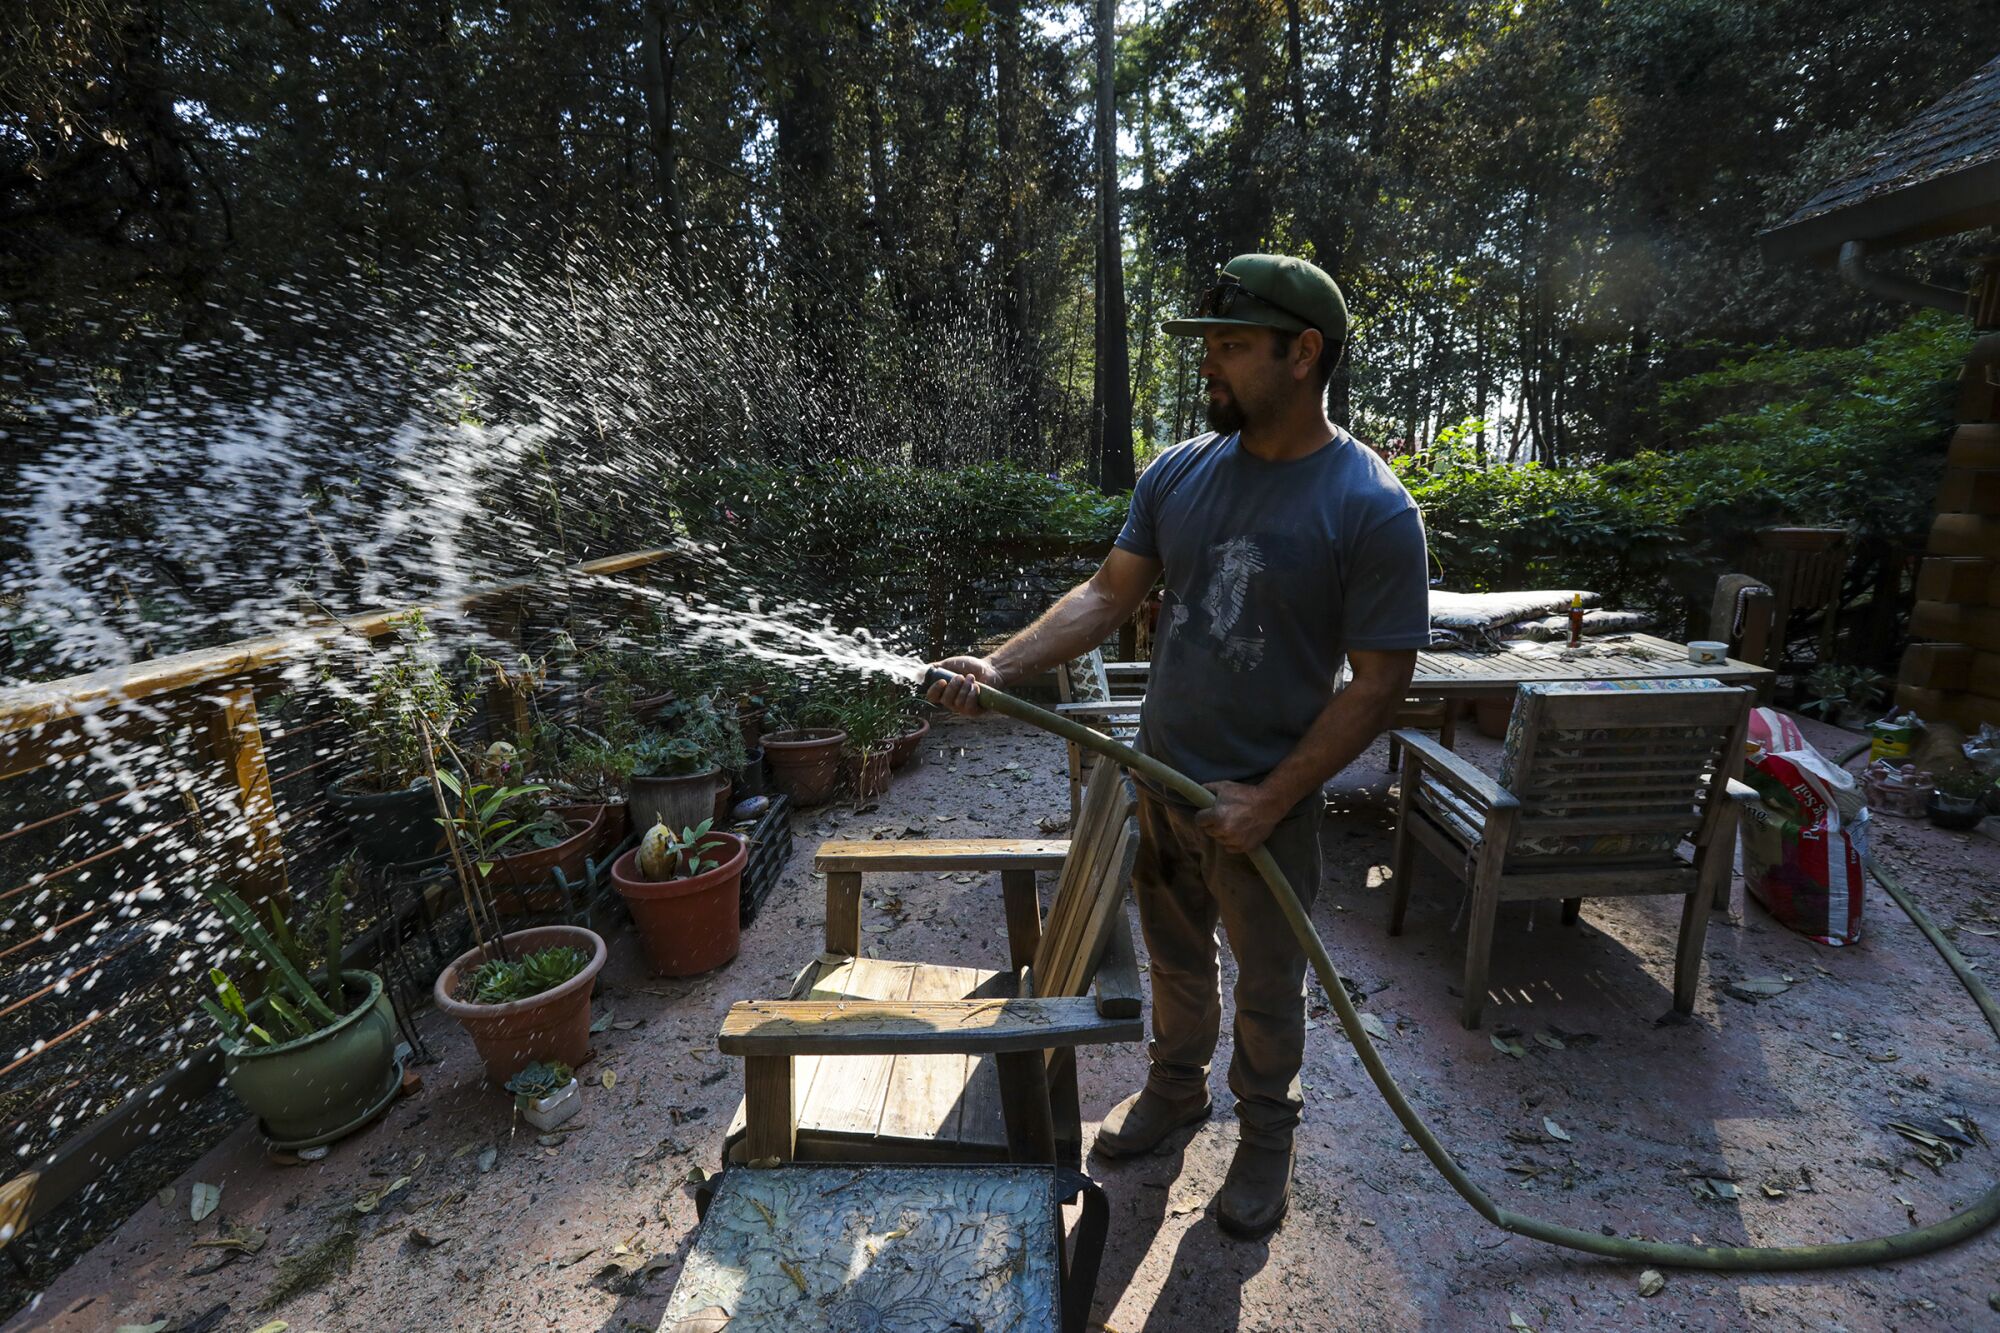 Jonah Torres, a cannabis distributor, waters plants on a patio of an evacuated neighbor.